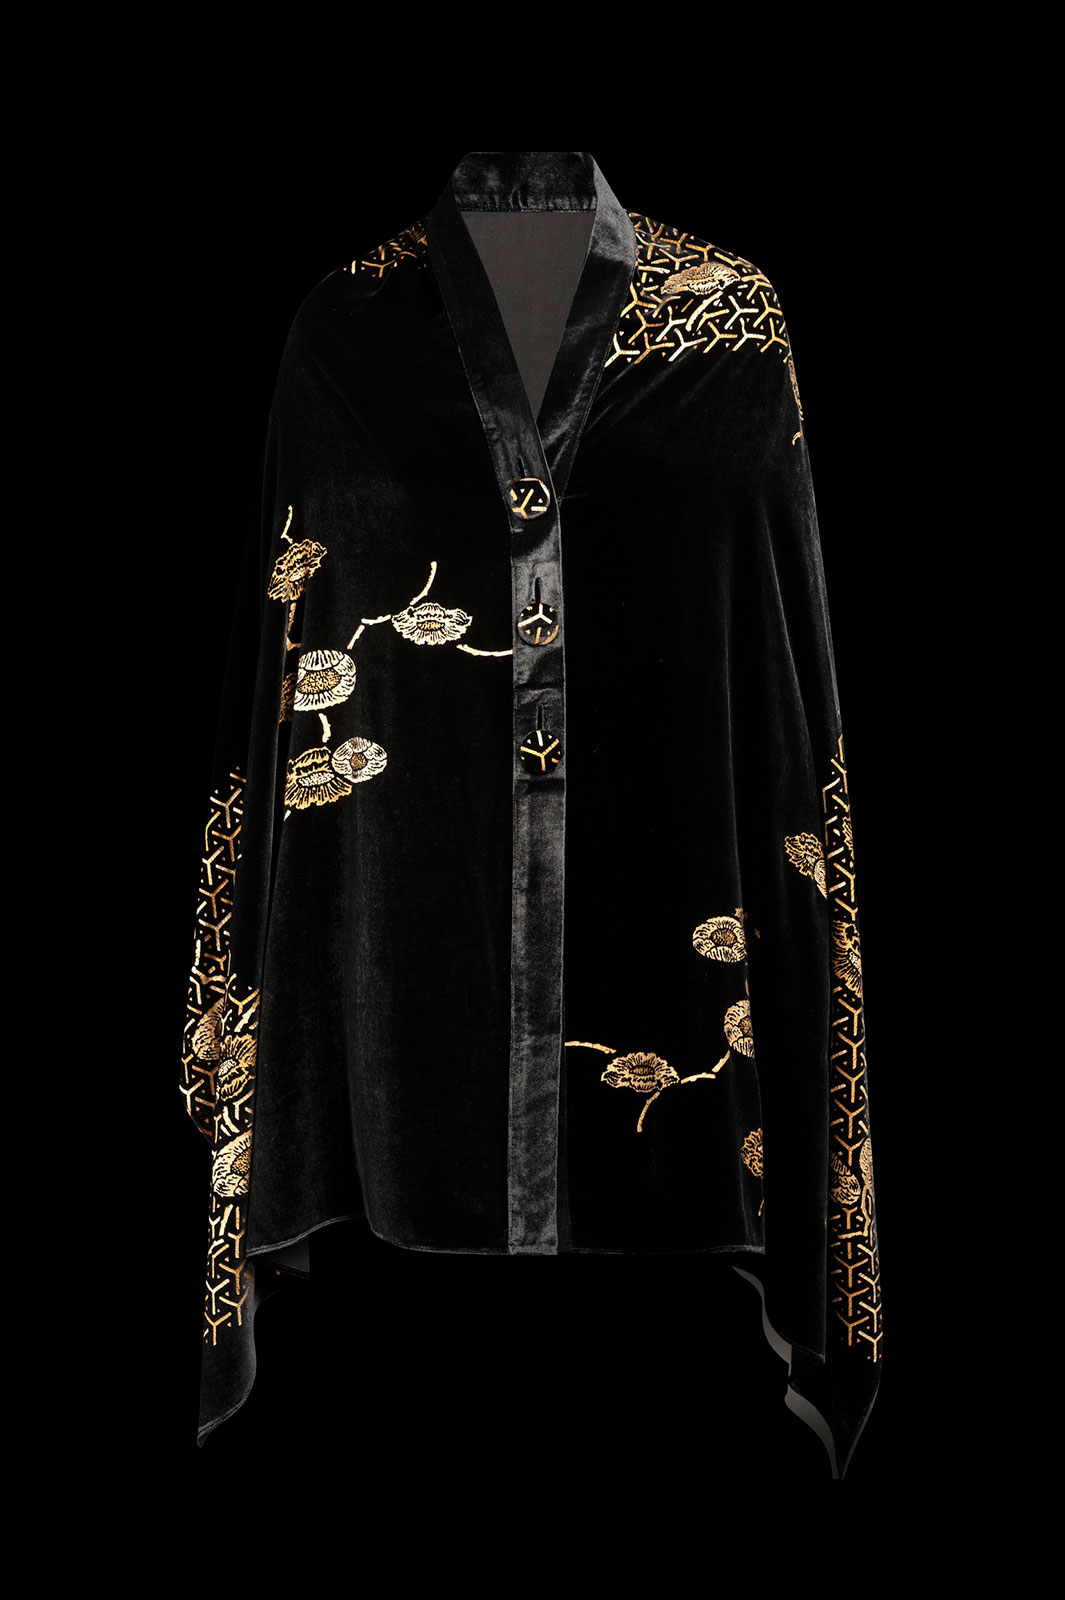 This furrowed velvet stole is based on Fortuny’s style and techniques.